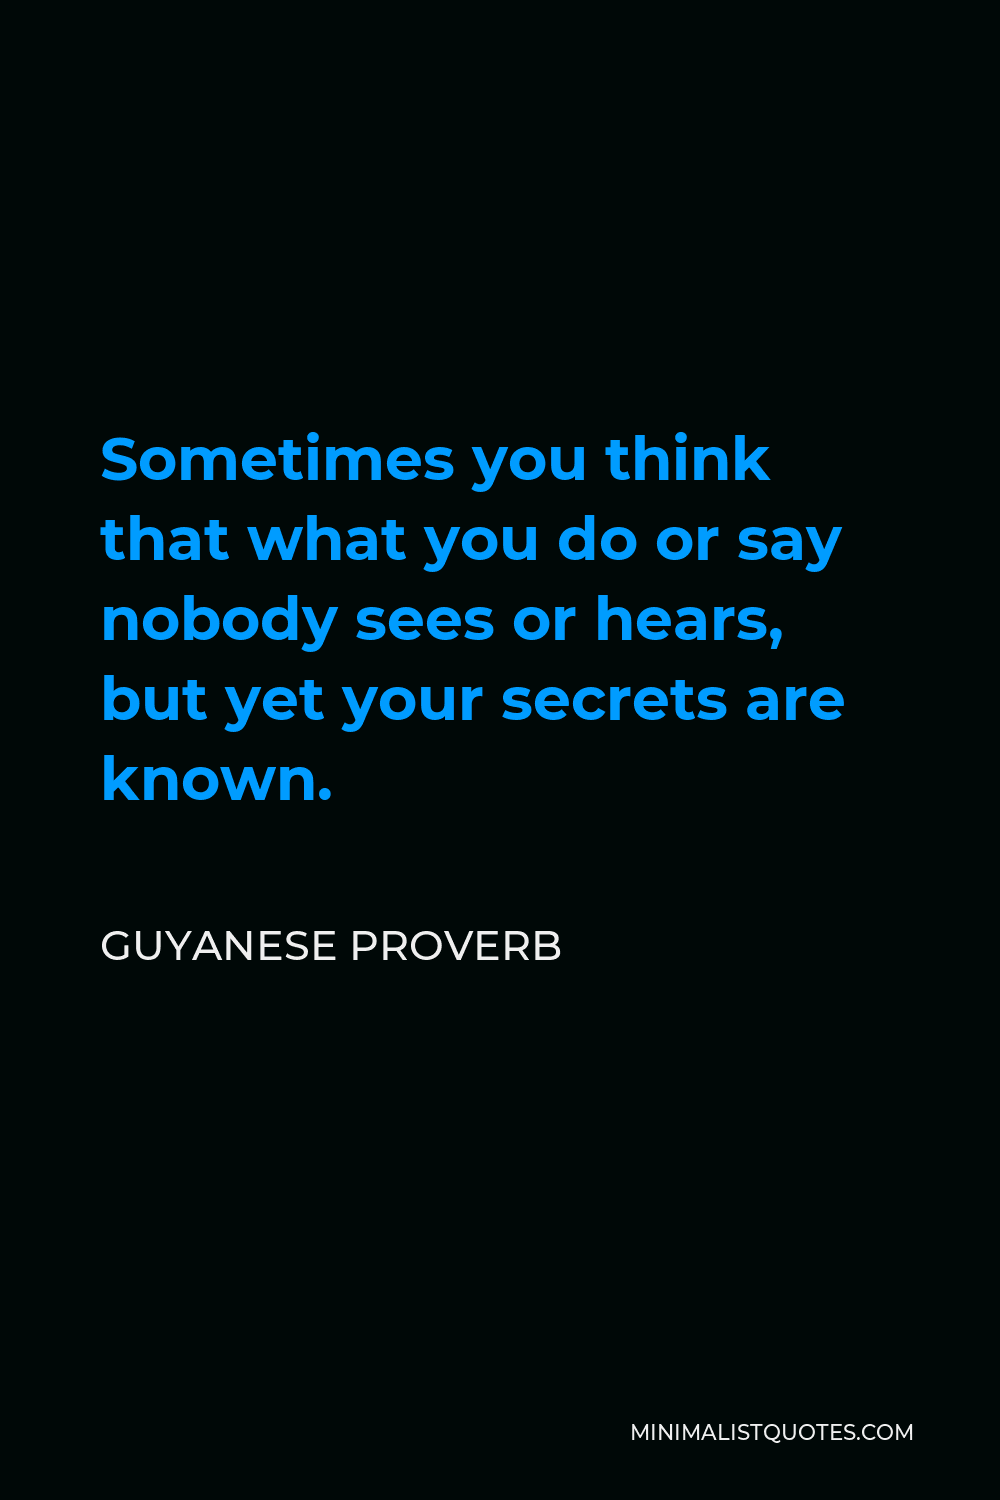 Guyanese Proverb Quote - Sometimes you think that what you do or say nobody sees or hears, but yet your secrets are known.